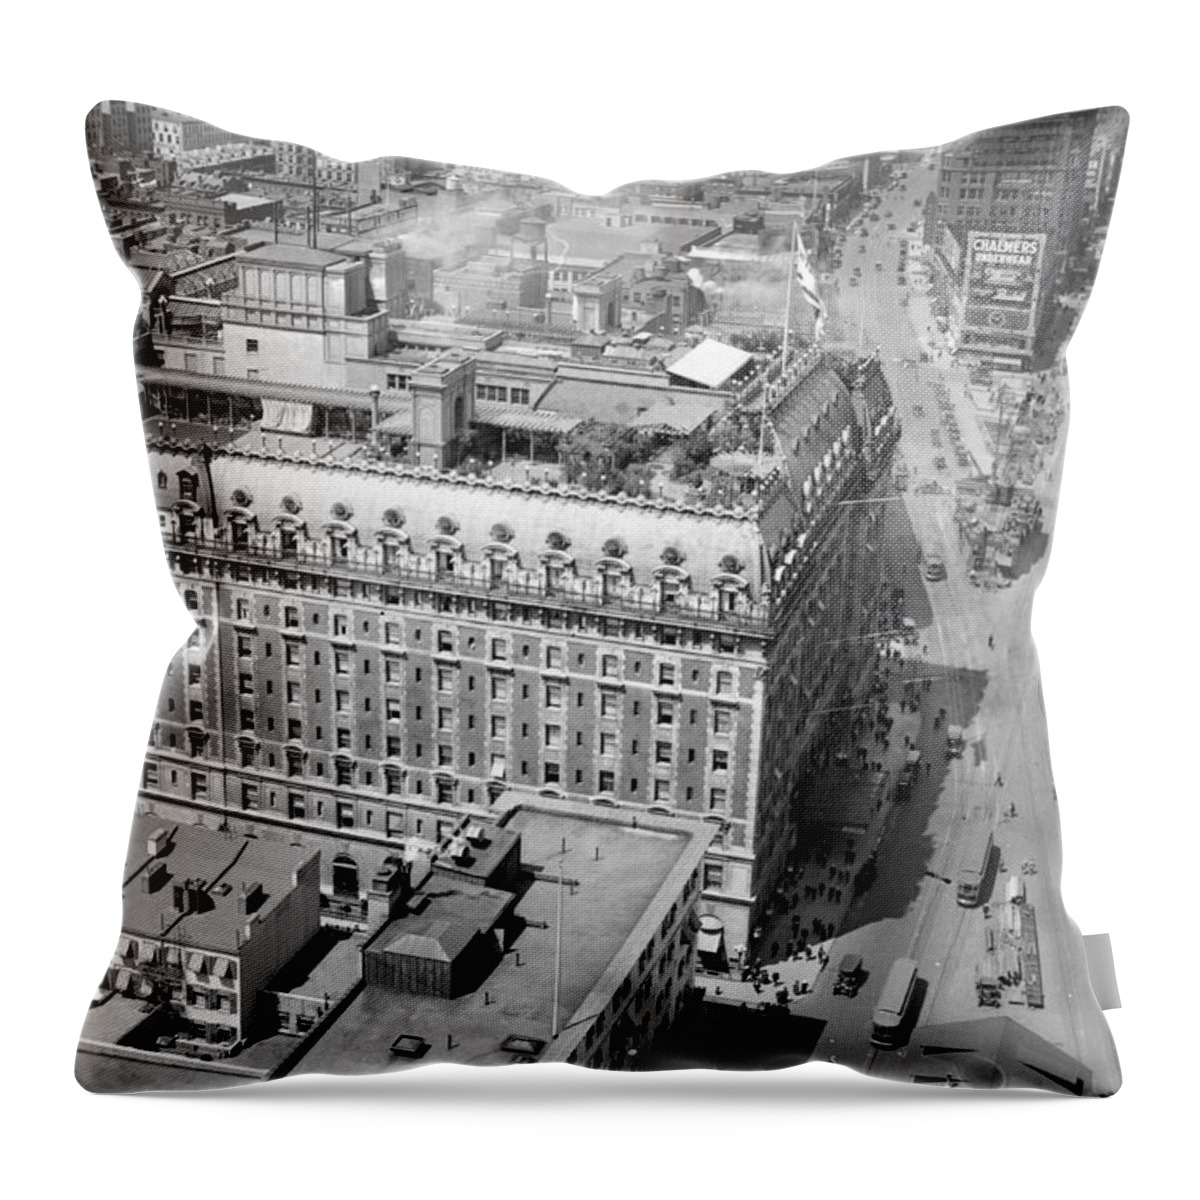 Architecture Throw Pillow featuring the photograph Nyc, Times Square, Hotel Astor, 1915-20 by Science Source